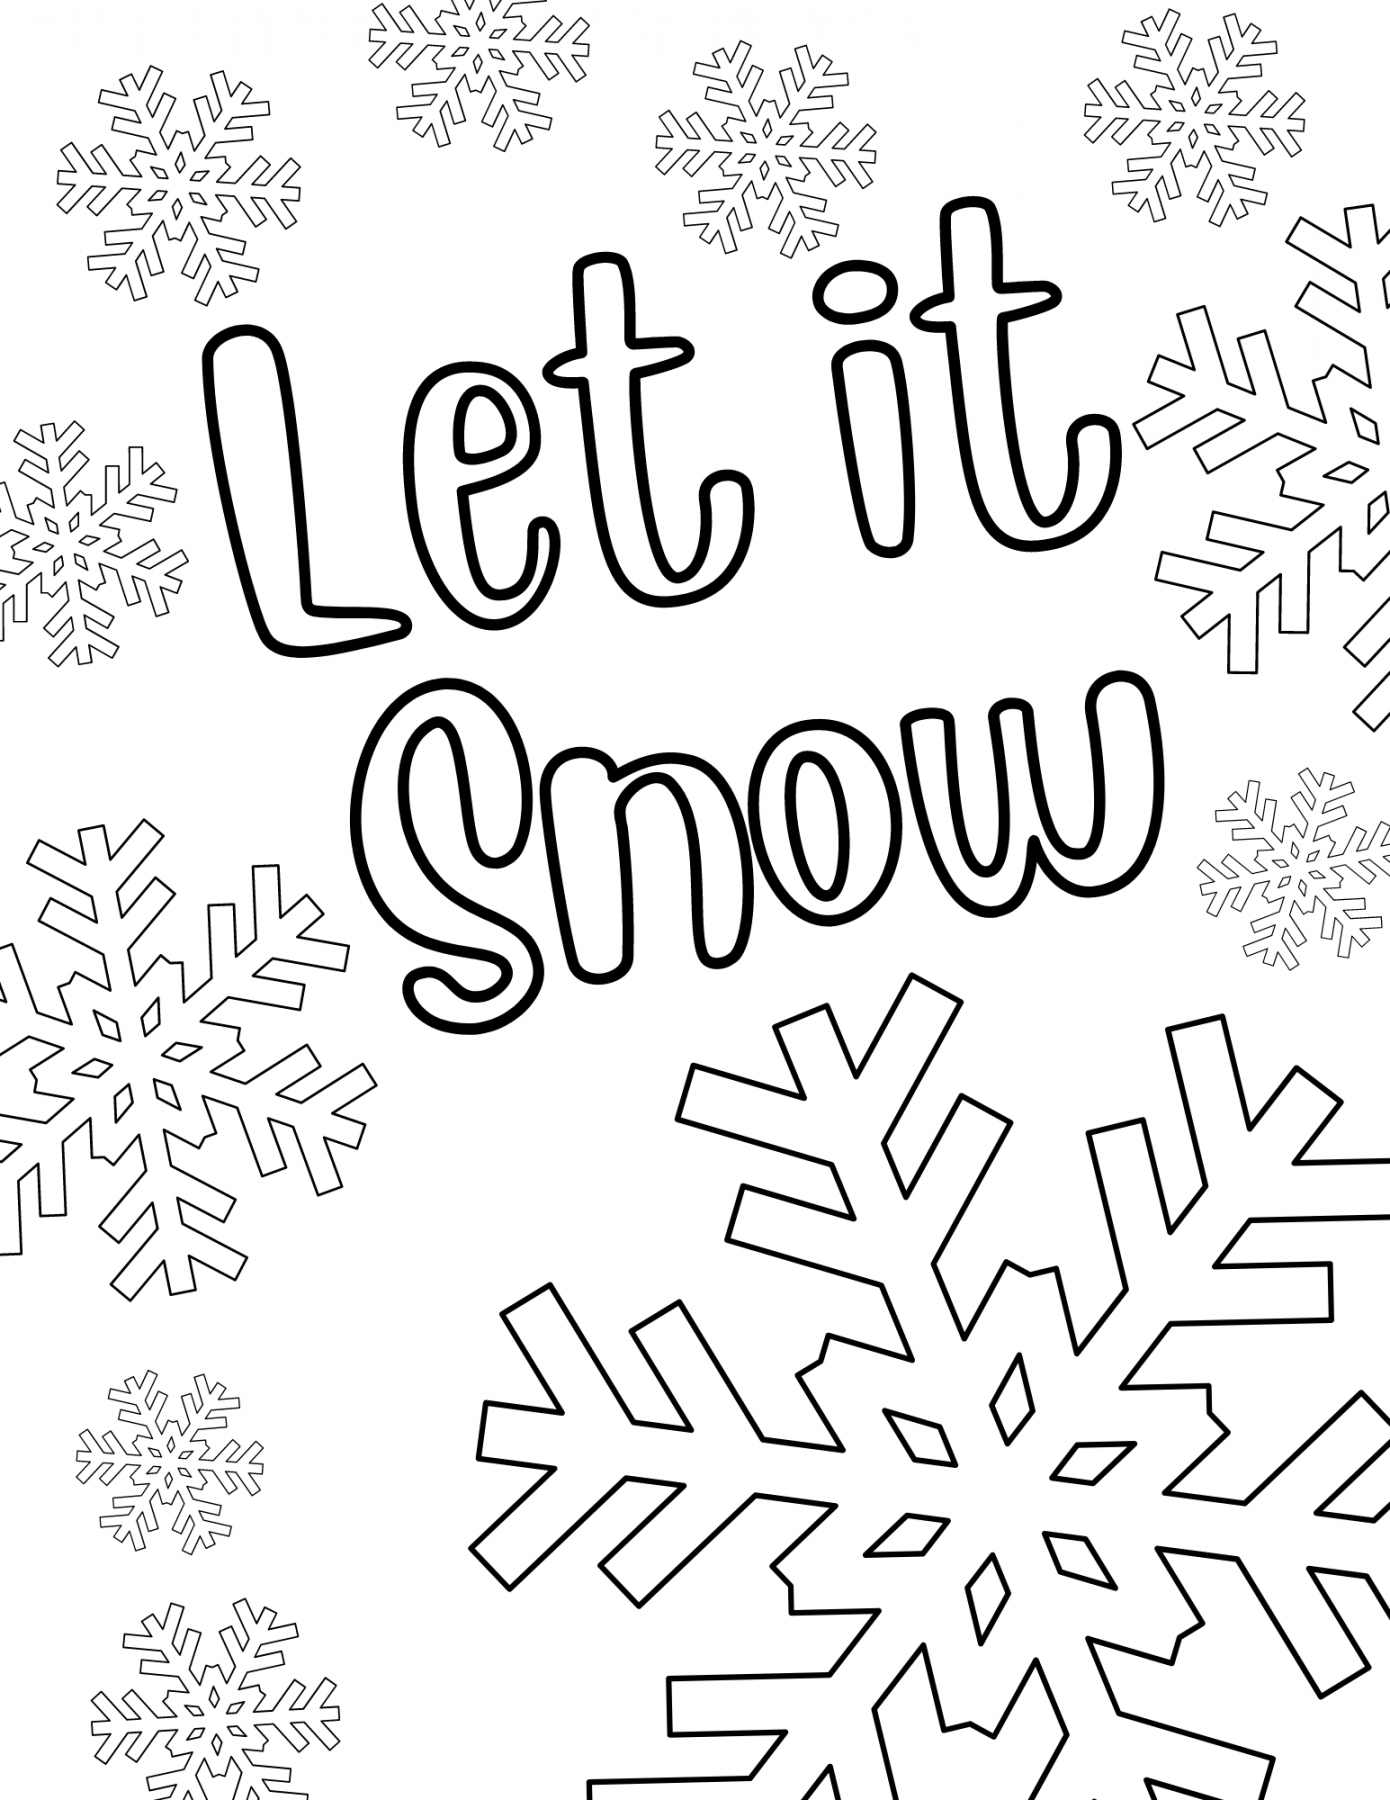 Free Printable Winter Coloring Pages for Kids - FREE Printables - Free Printable Winter Coloring Pages